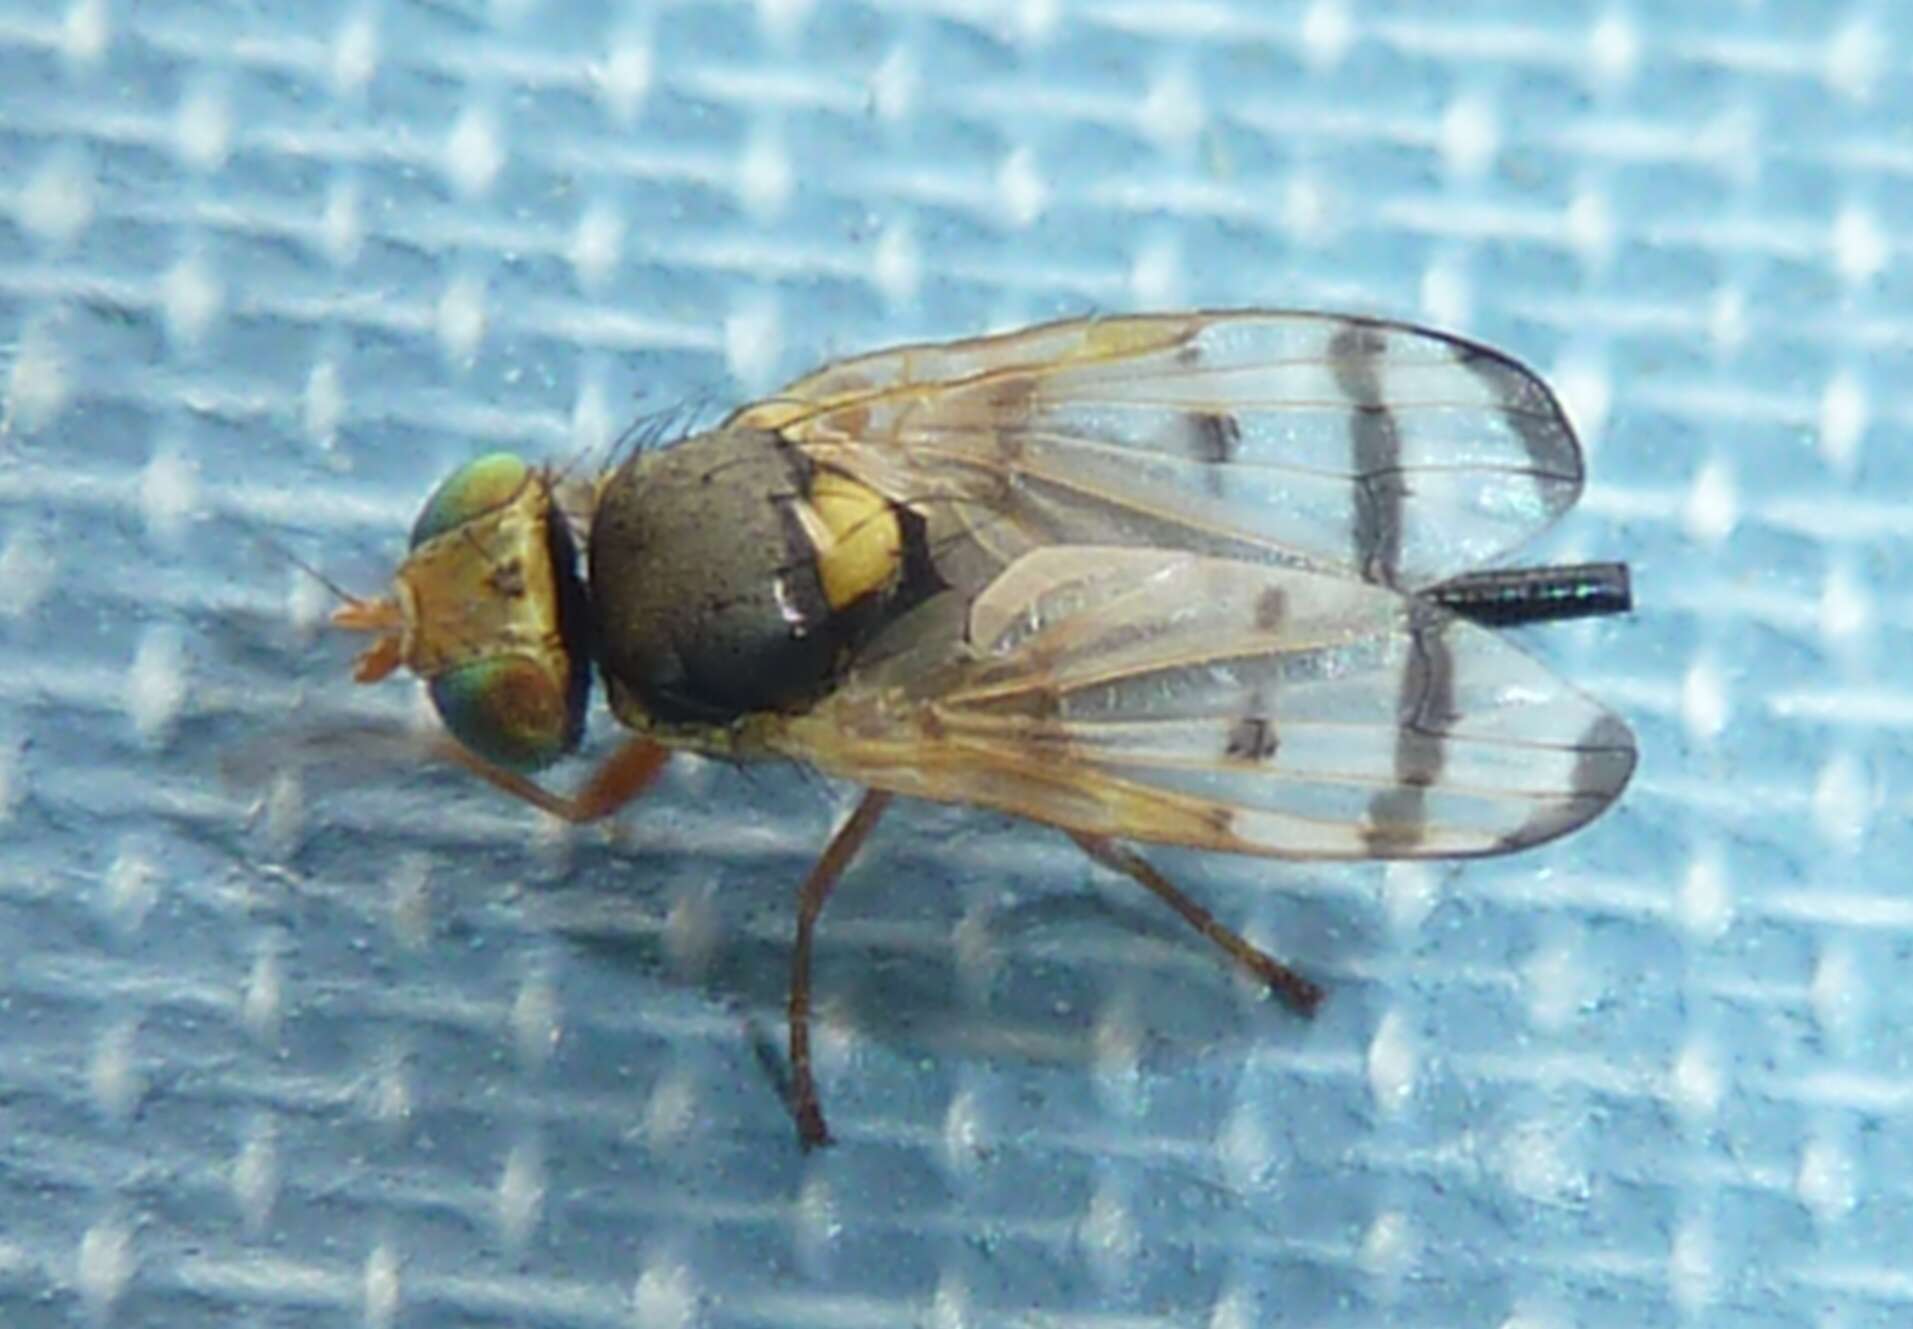 Image of Fruit fly